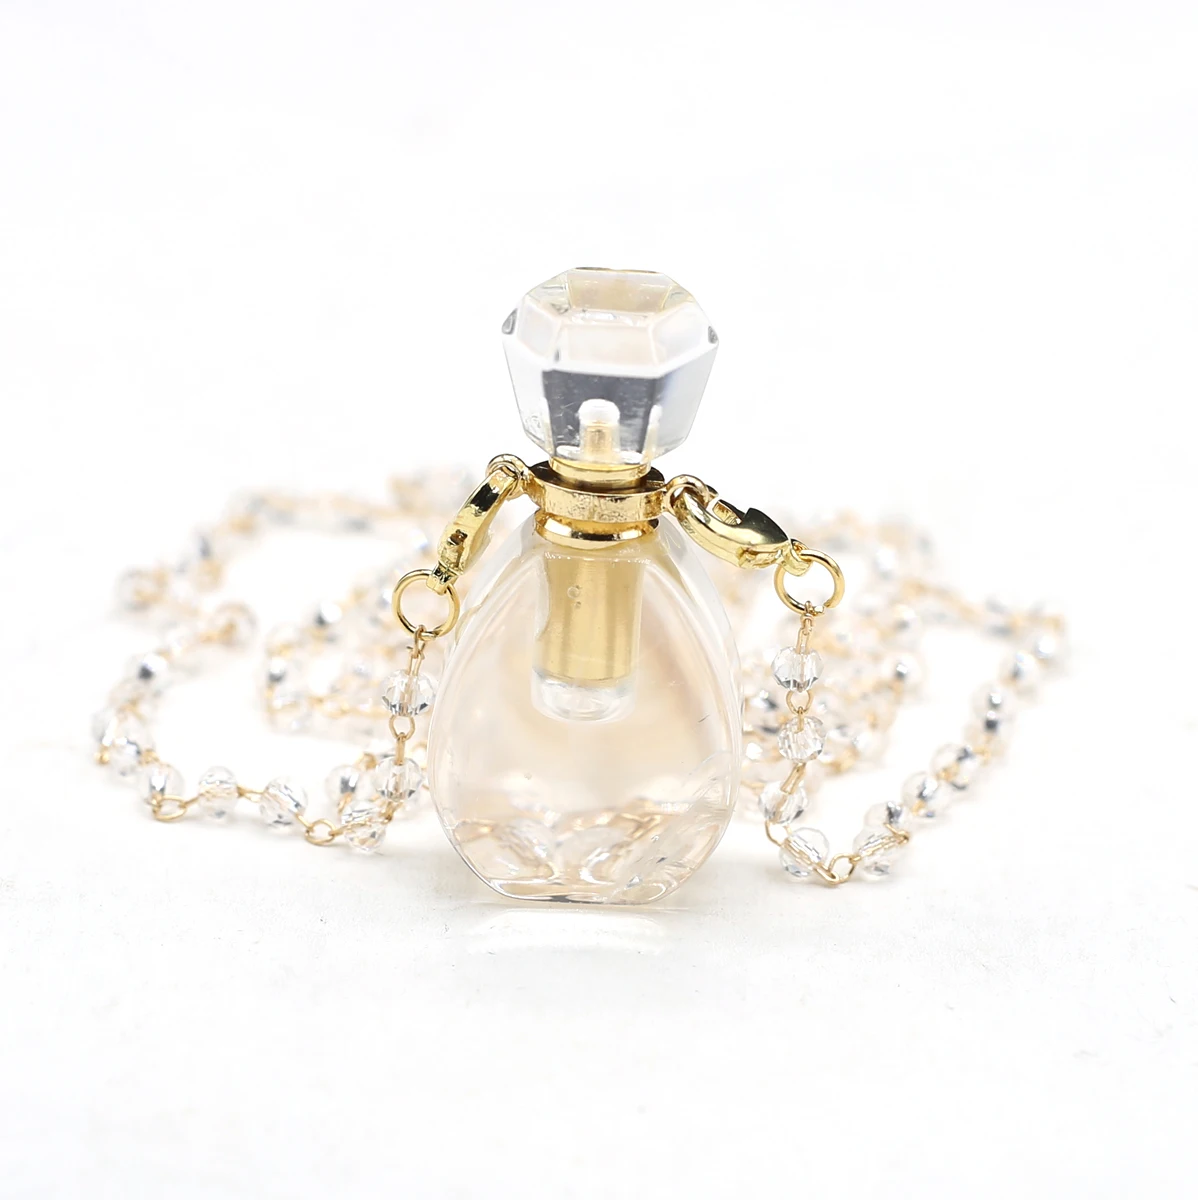 

Essential Oil Diffuser Perfume Bottle Gemstone Reiki Water Drop White Crystal Agate Charm Pendulum Pendant Necklace Jewelry Gift